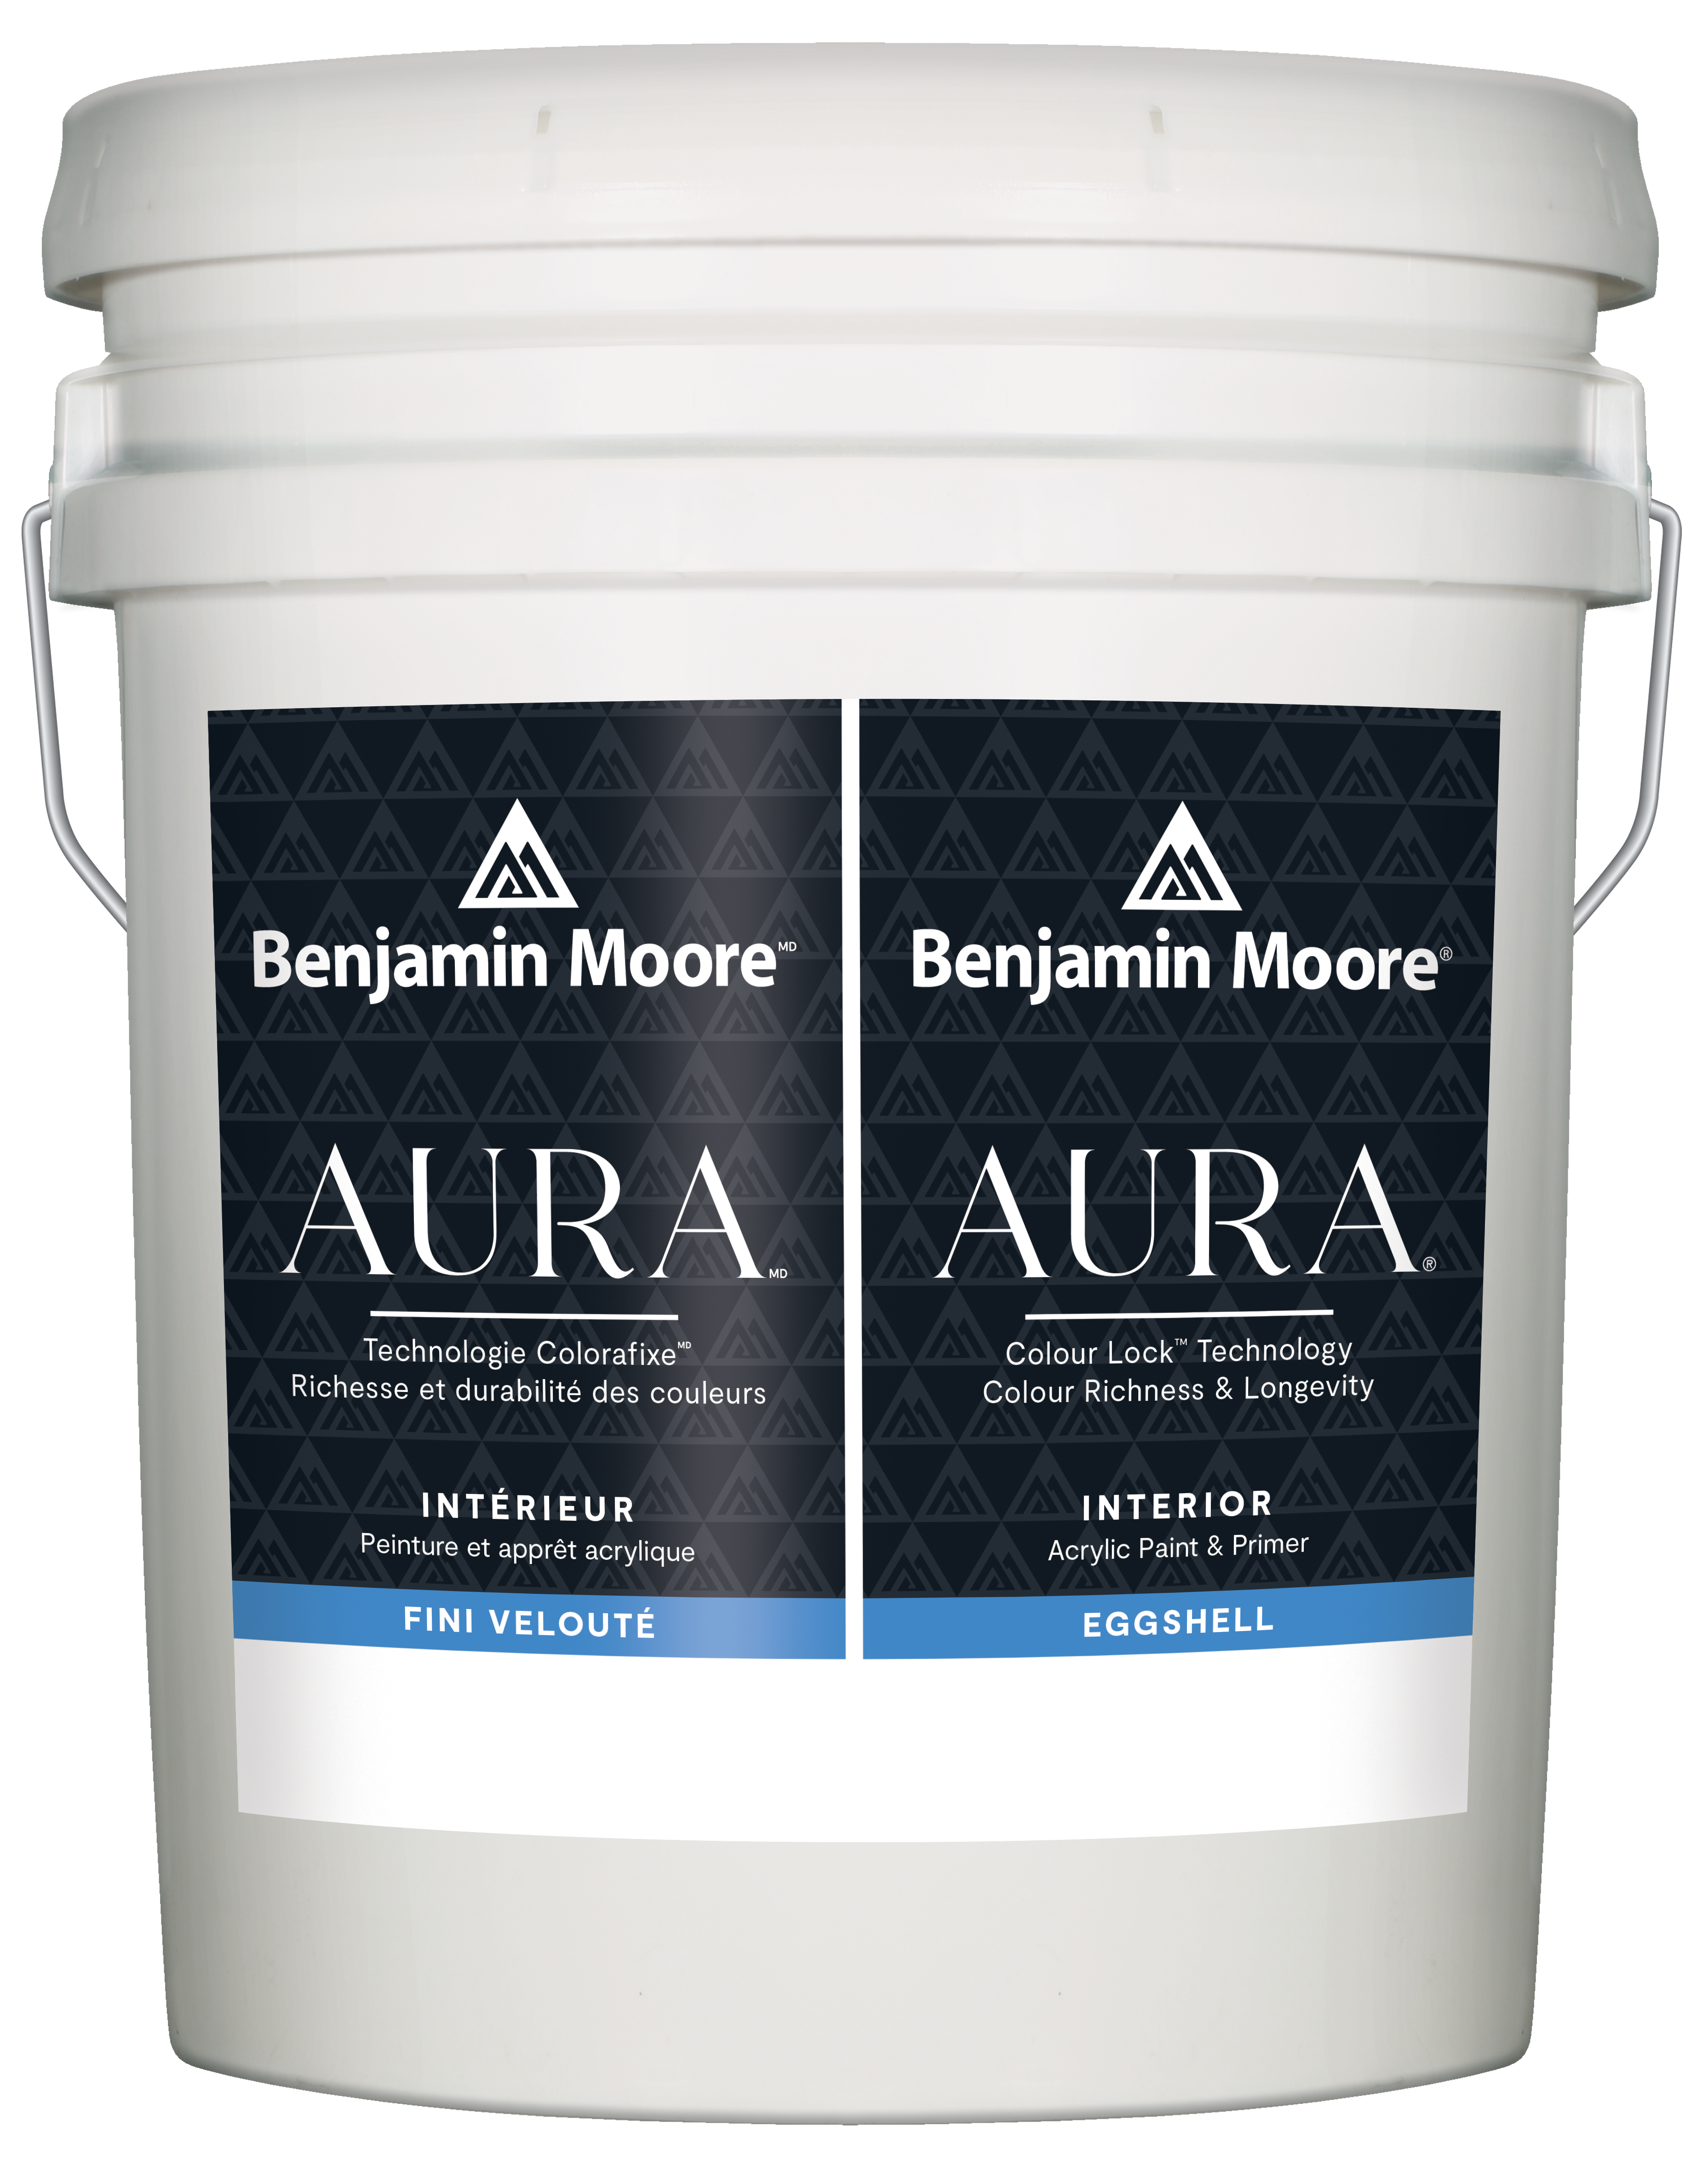 Aura® Waterbourne Interior Paint & Primer Scuff-Resistant Coating - The Paint People